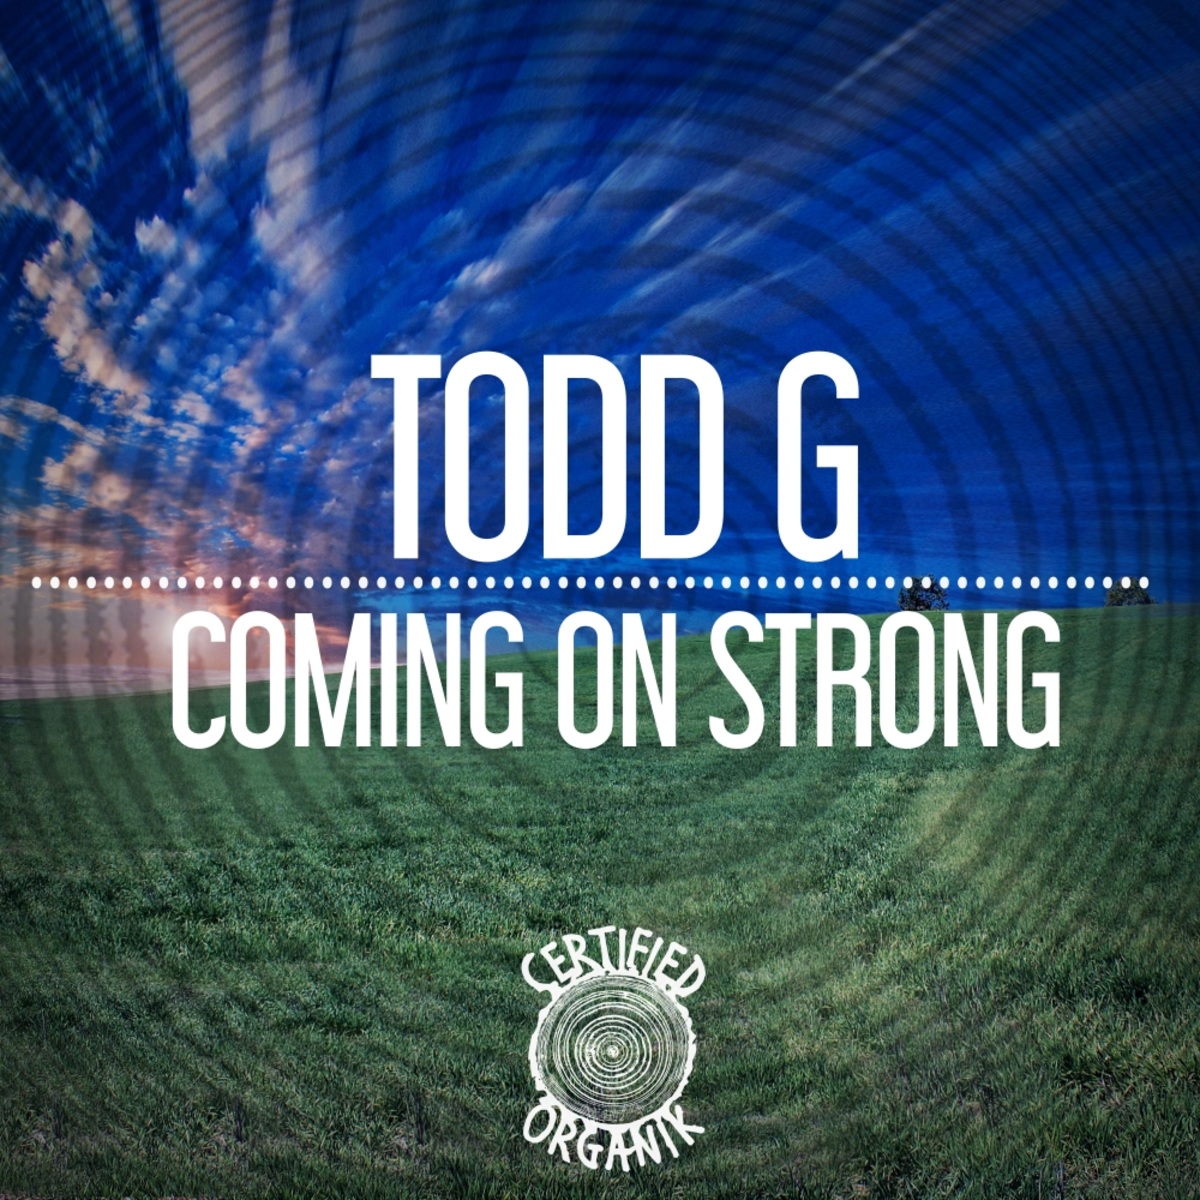 Todd G - Coming On Strong / Certified Organik Records